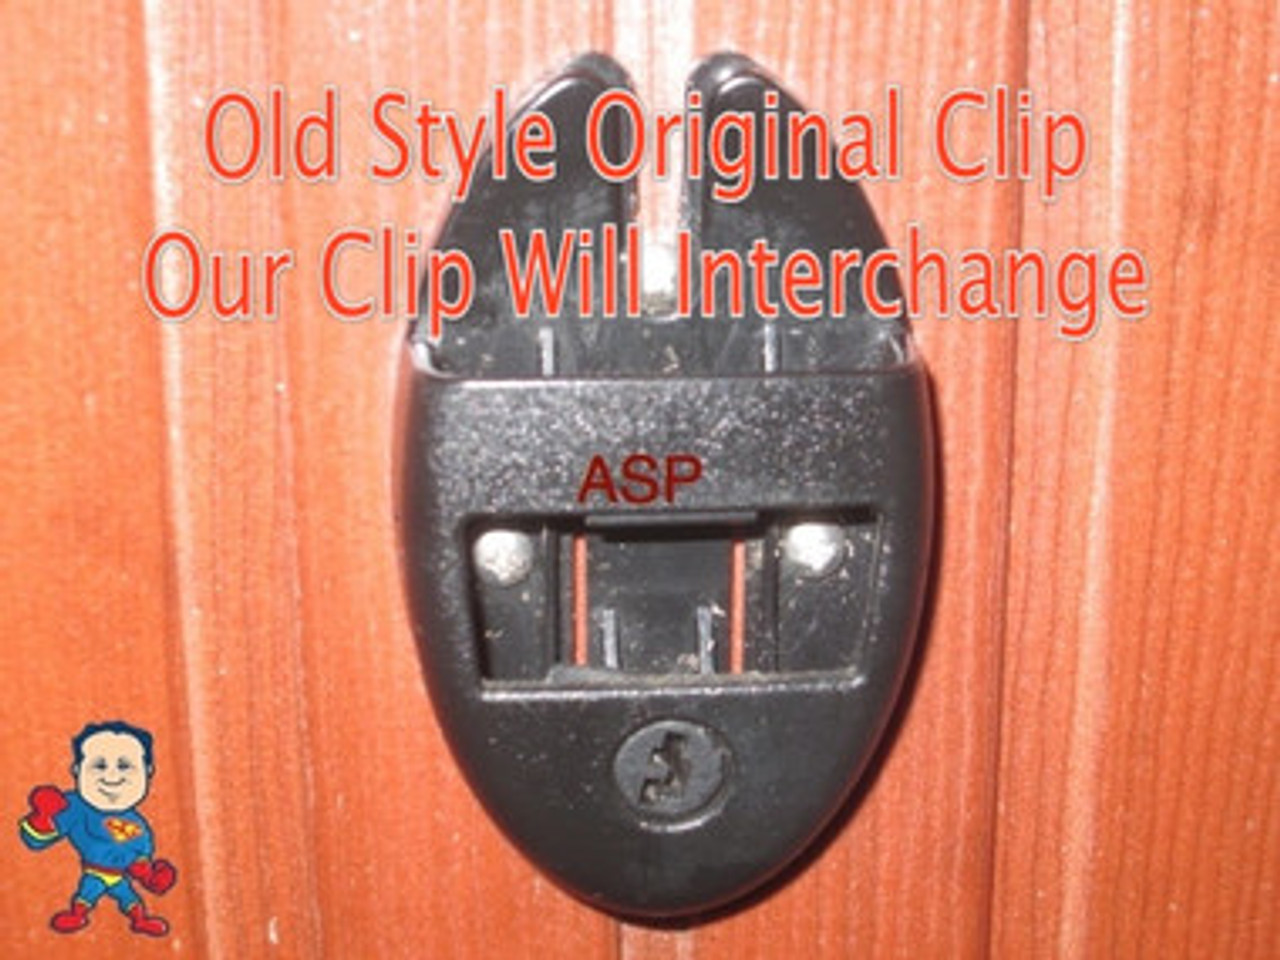 This is an example of a variation of the clips used on this brand tub but they will interchange.